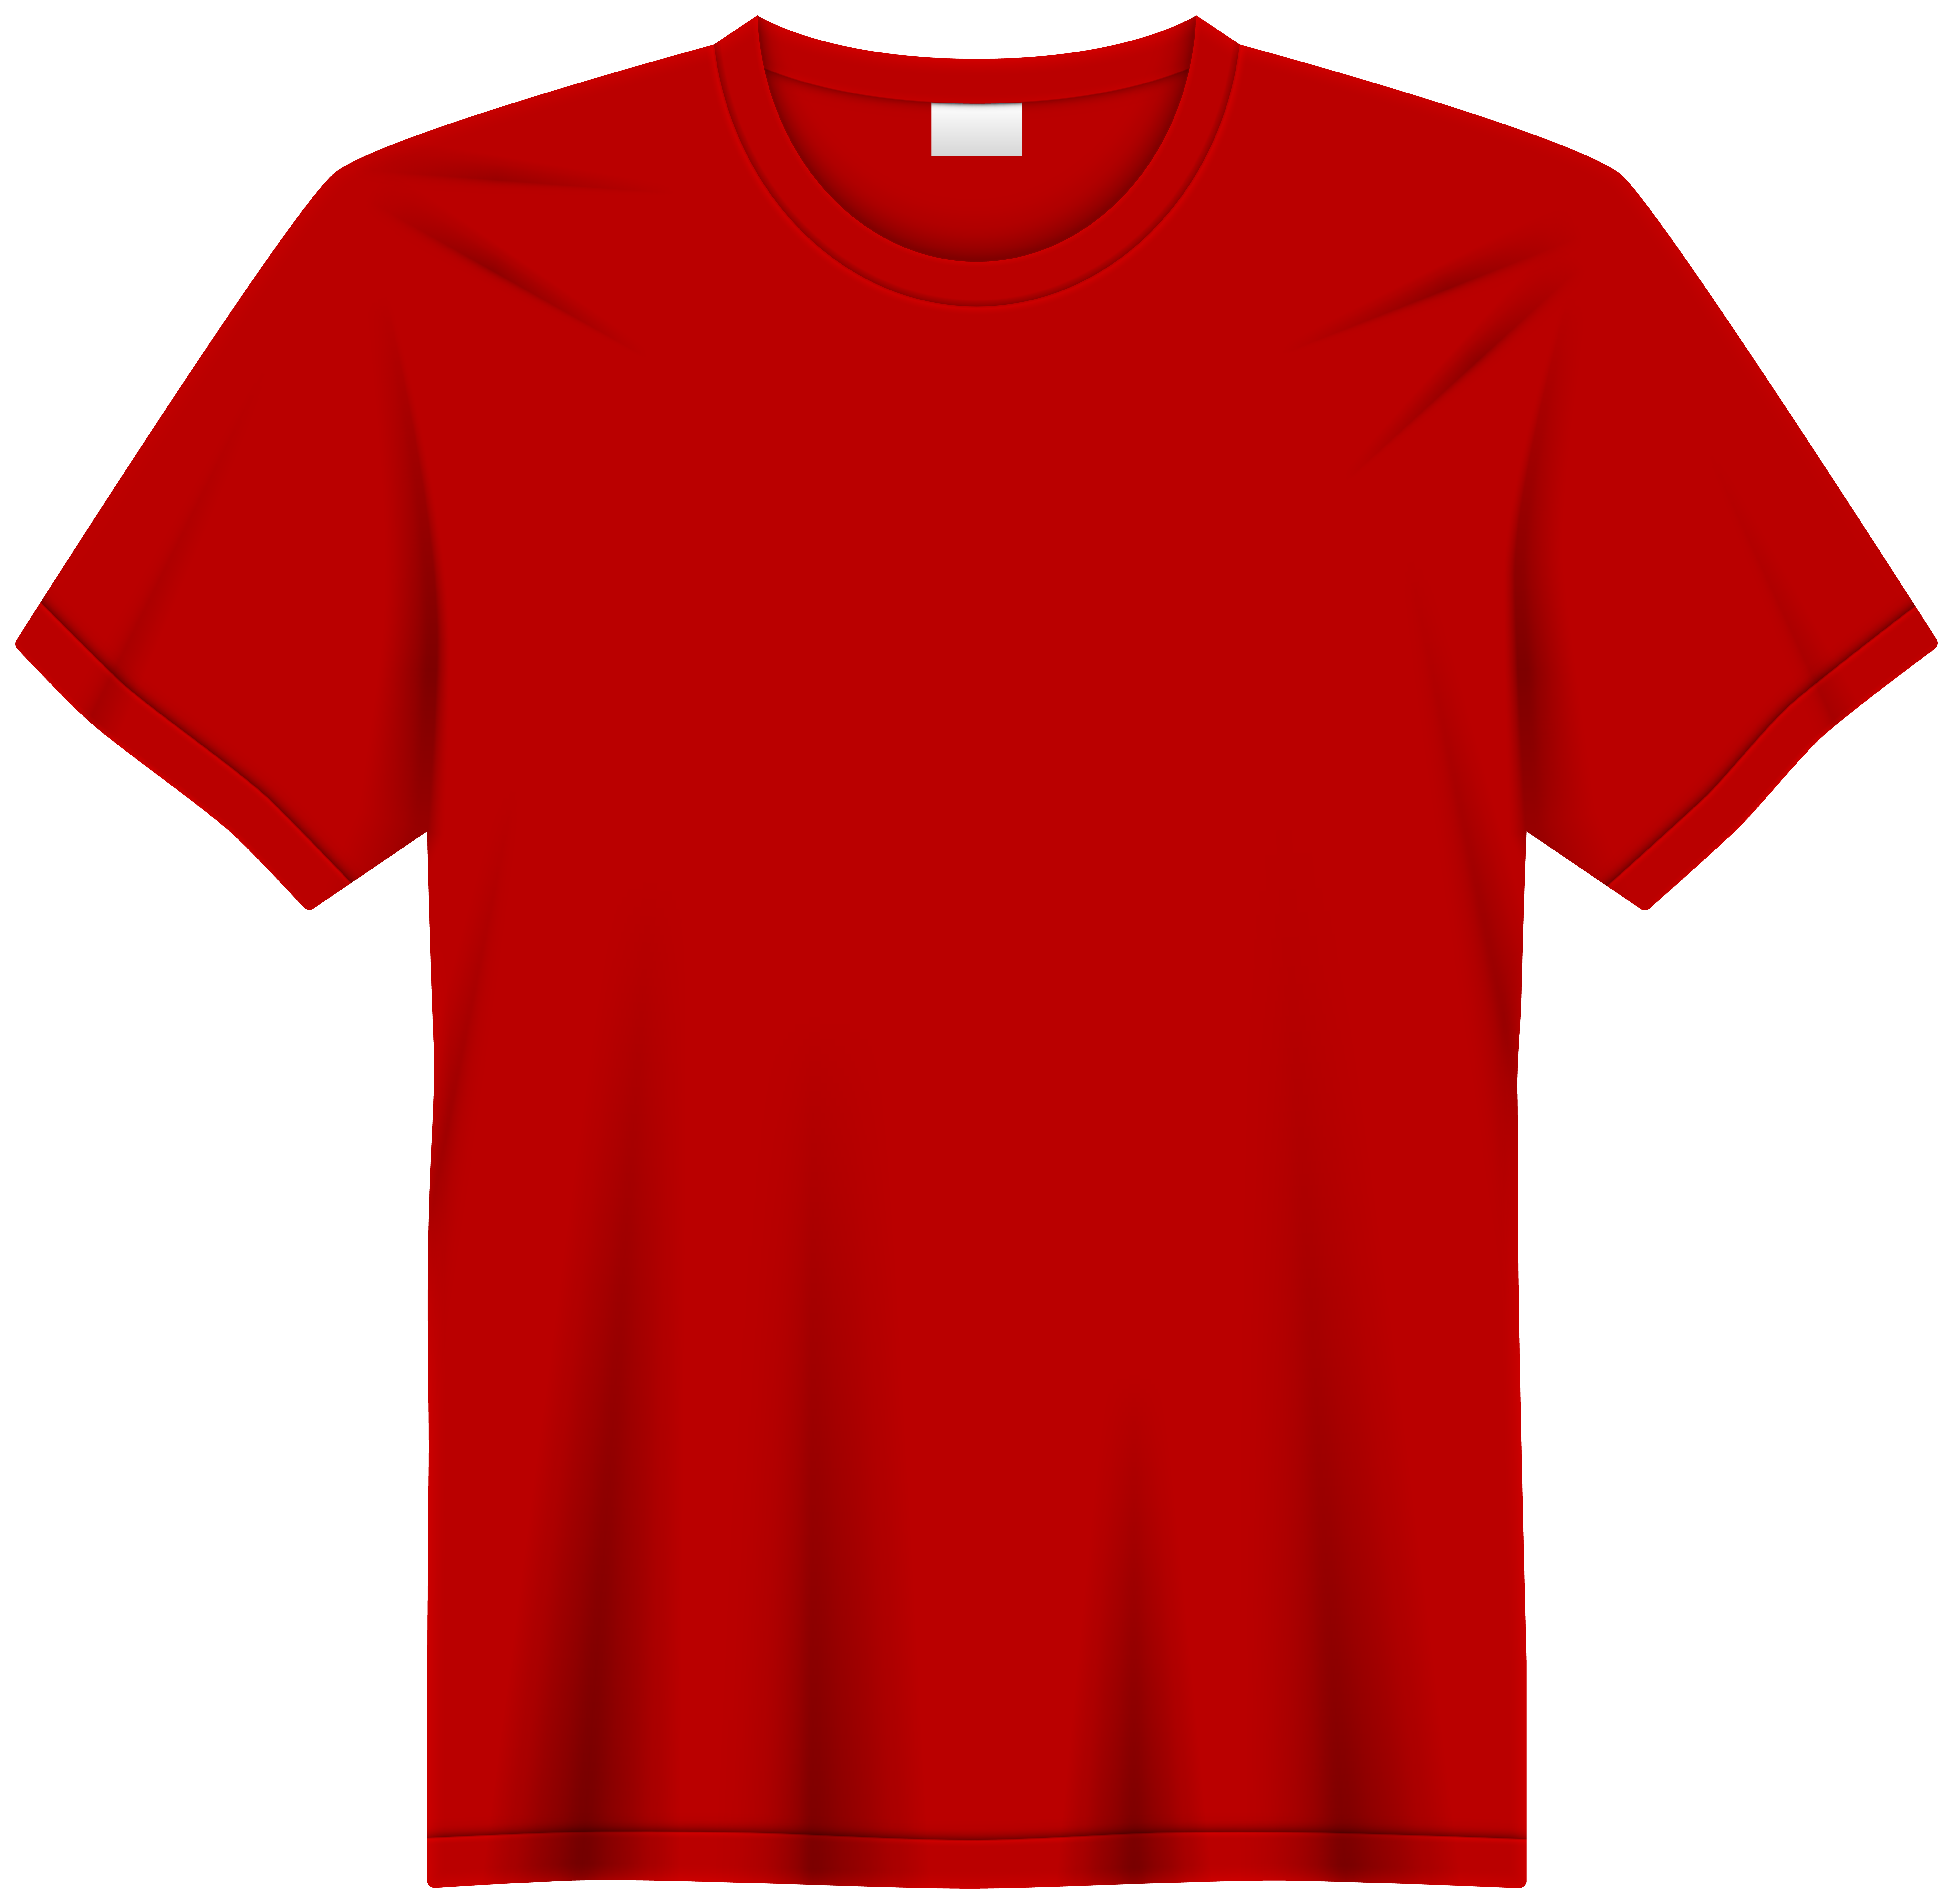 red t shirt clipart